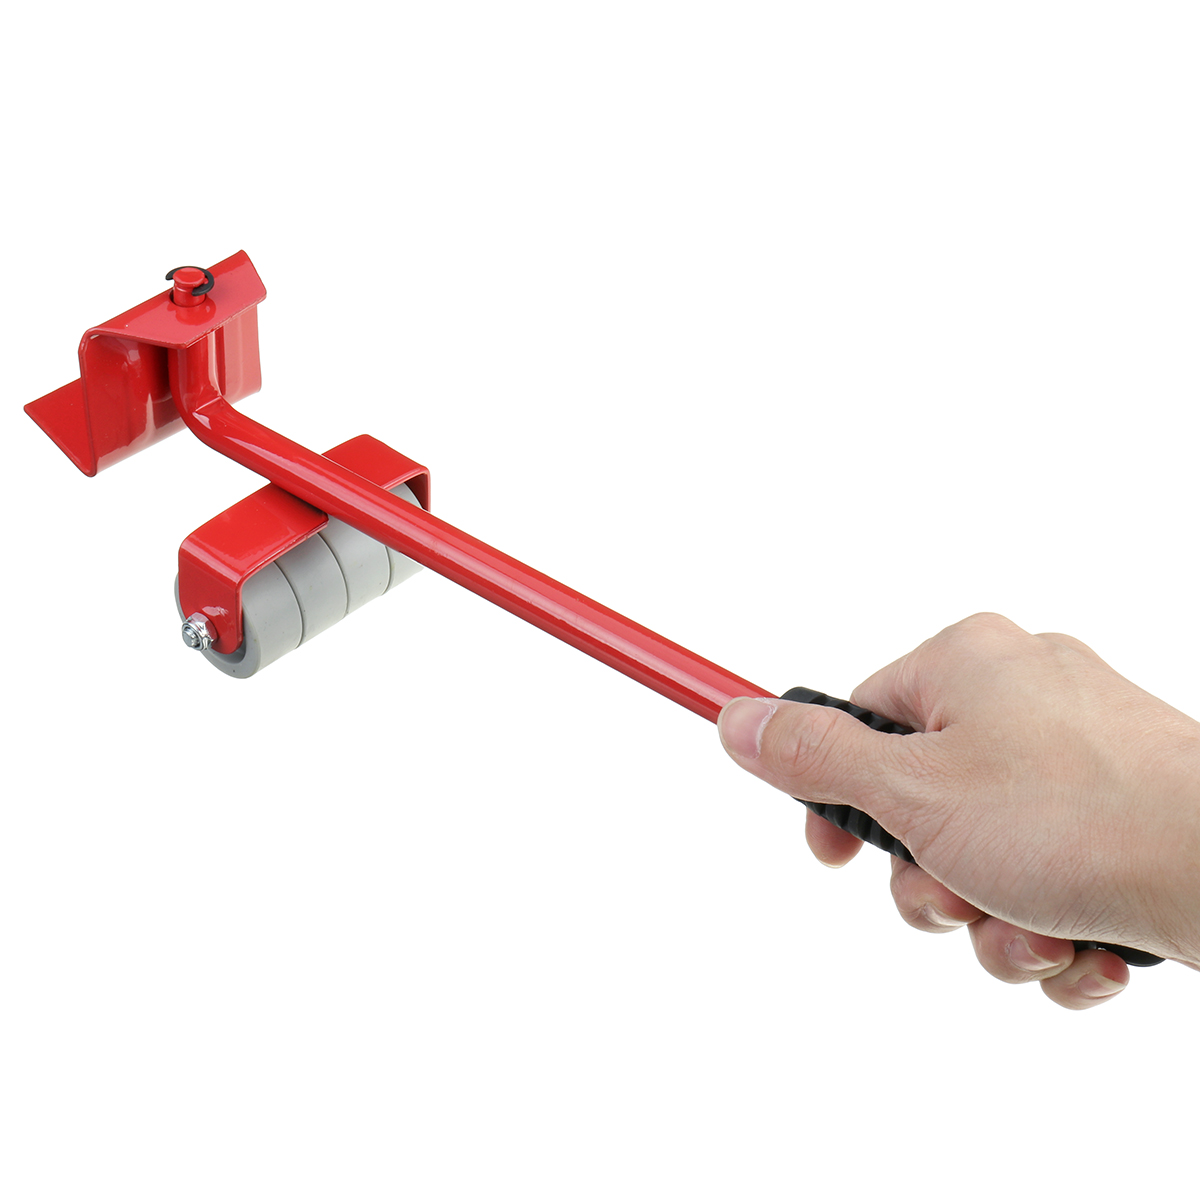 5Pcs-Red-Furniture-Mover-Heavy-Duty-Lifter-Mover-Transport-Set-Furniture-Roller-Tool-1635325-4